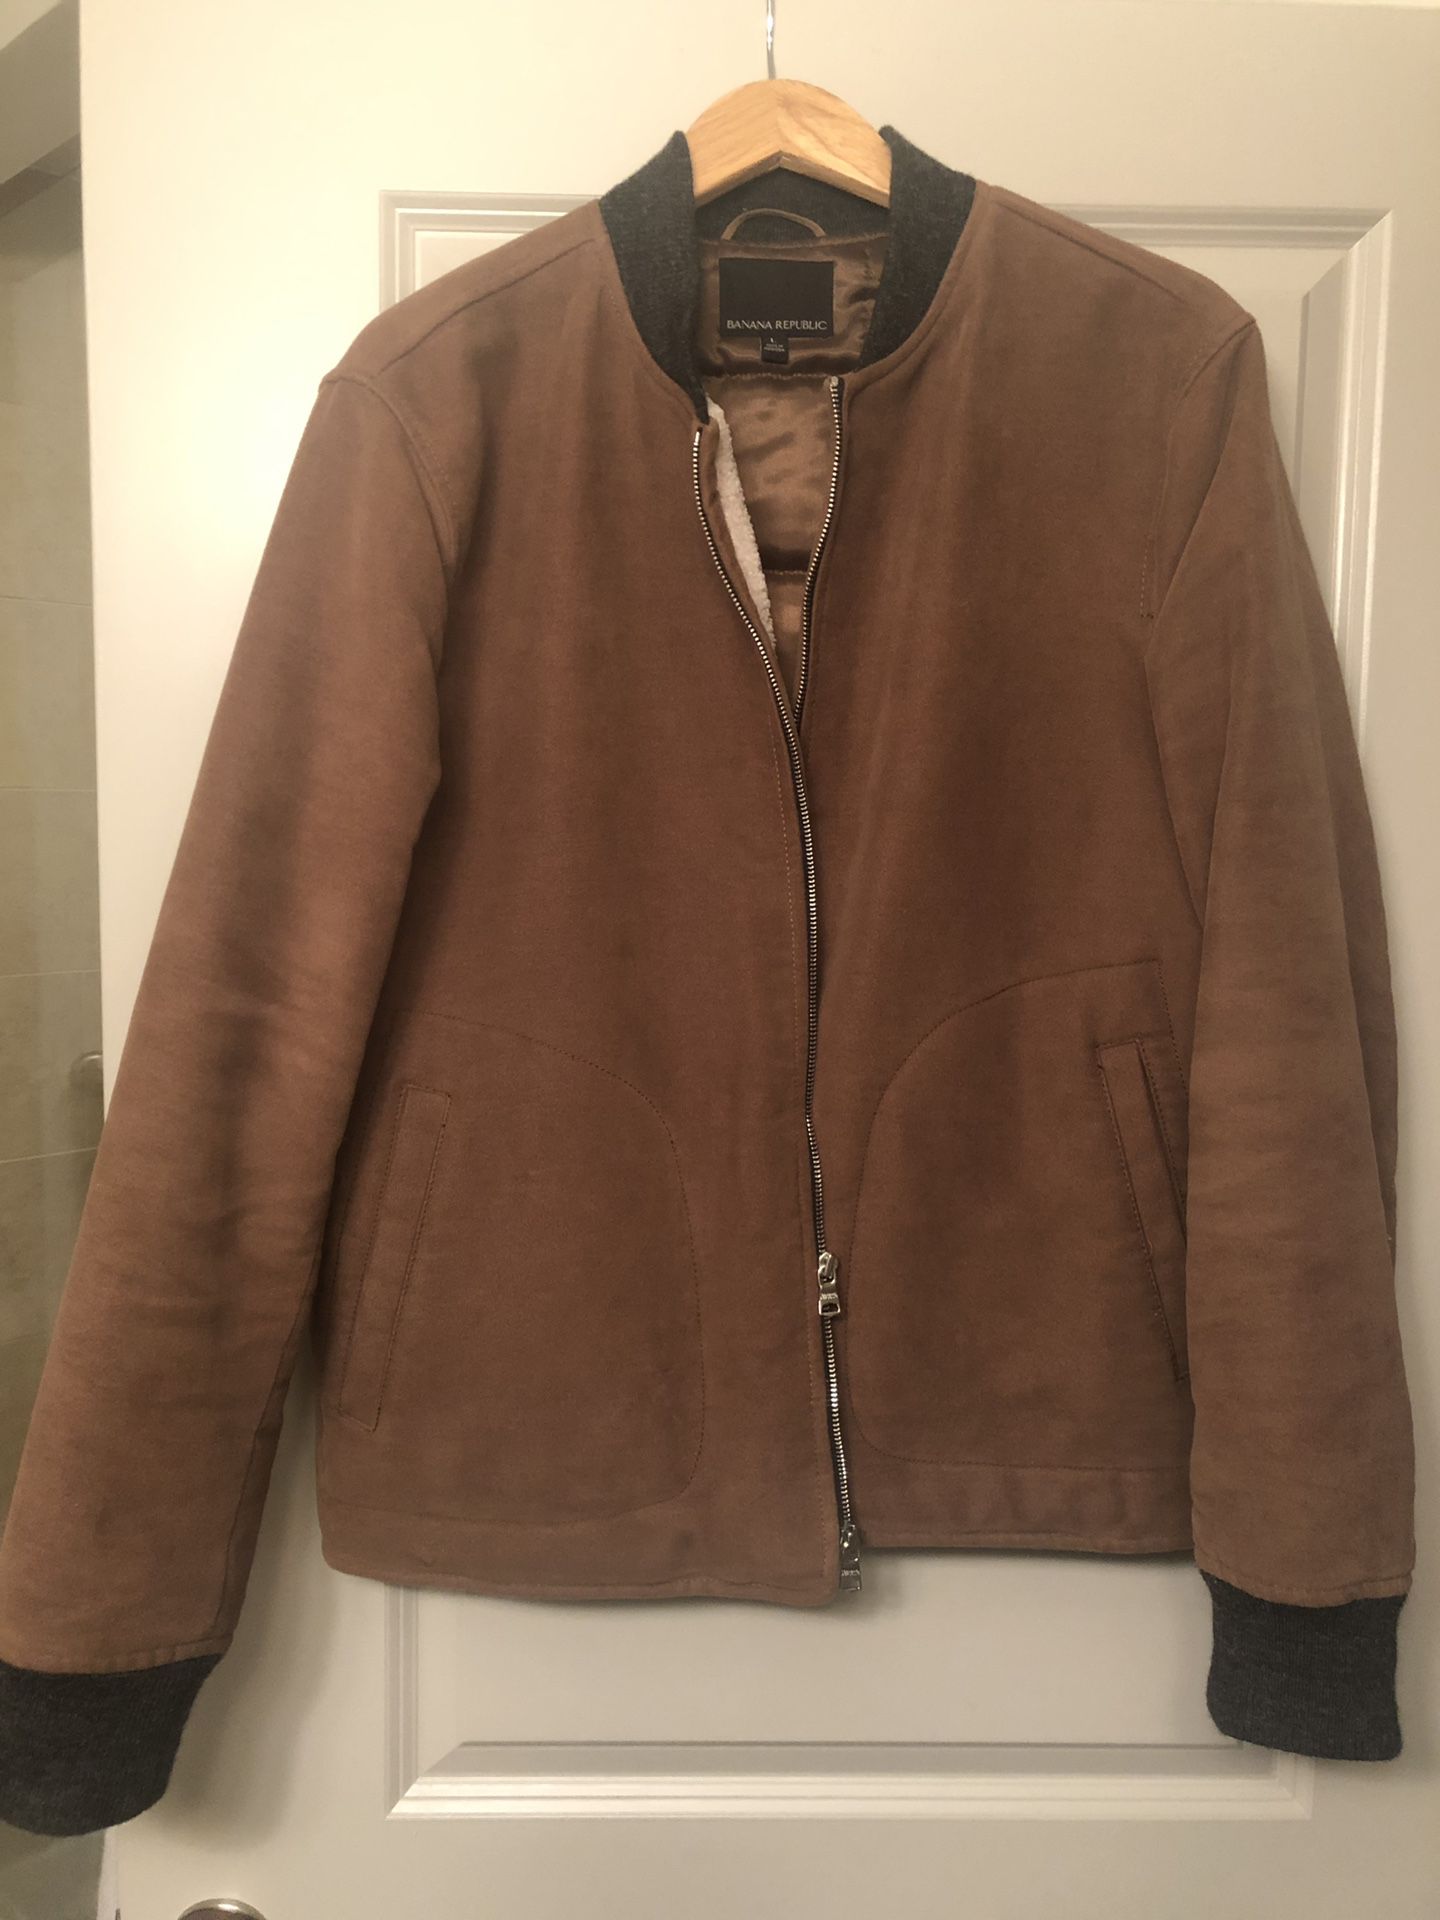 Men’s Carhart style Coat with shearling lining